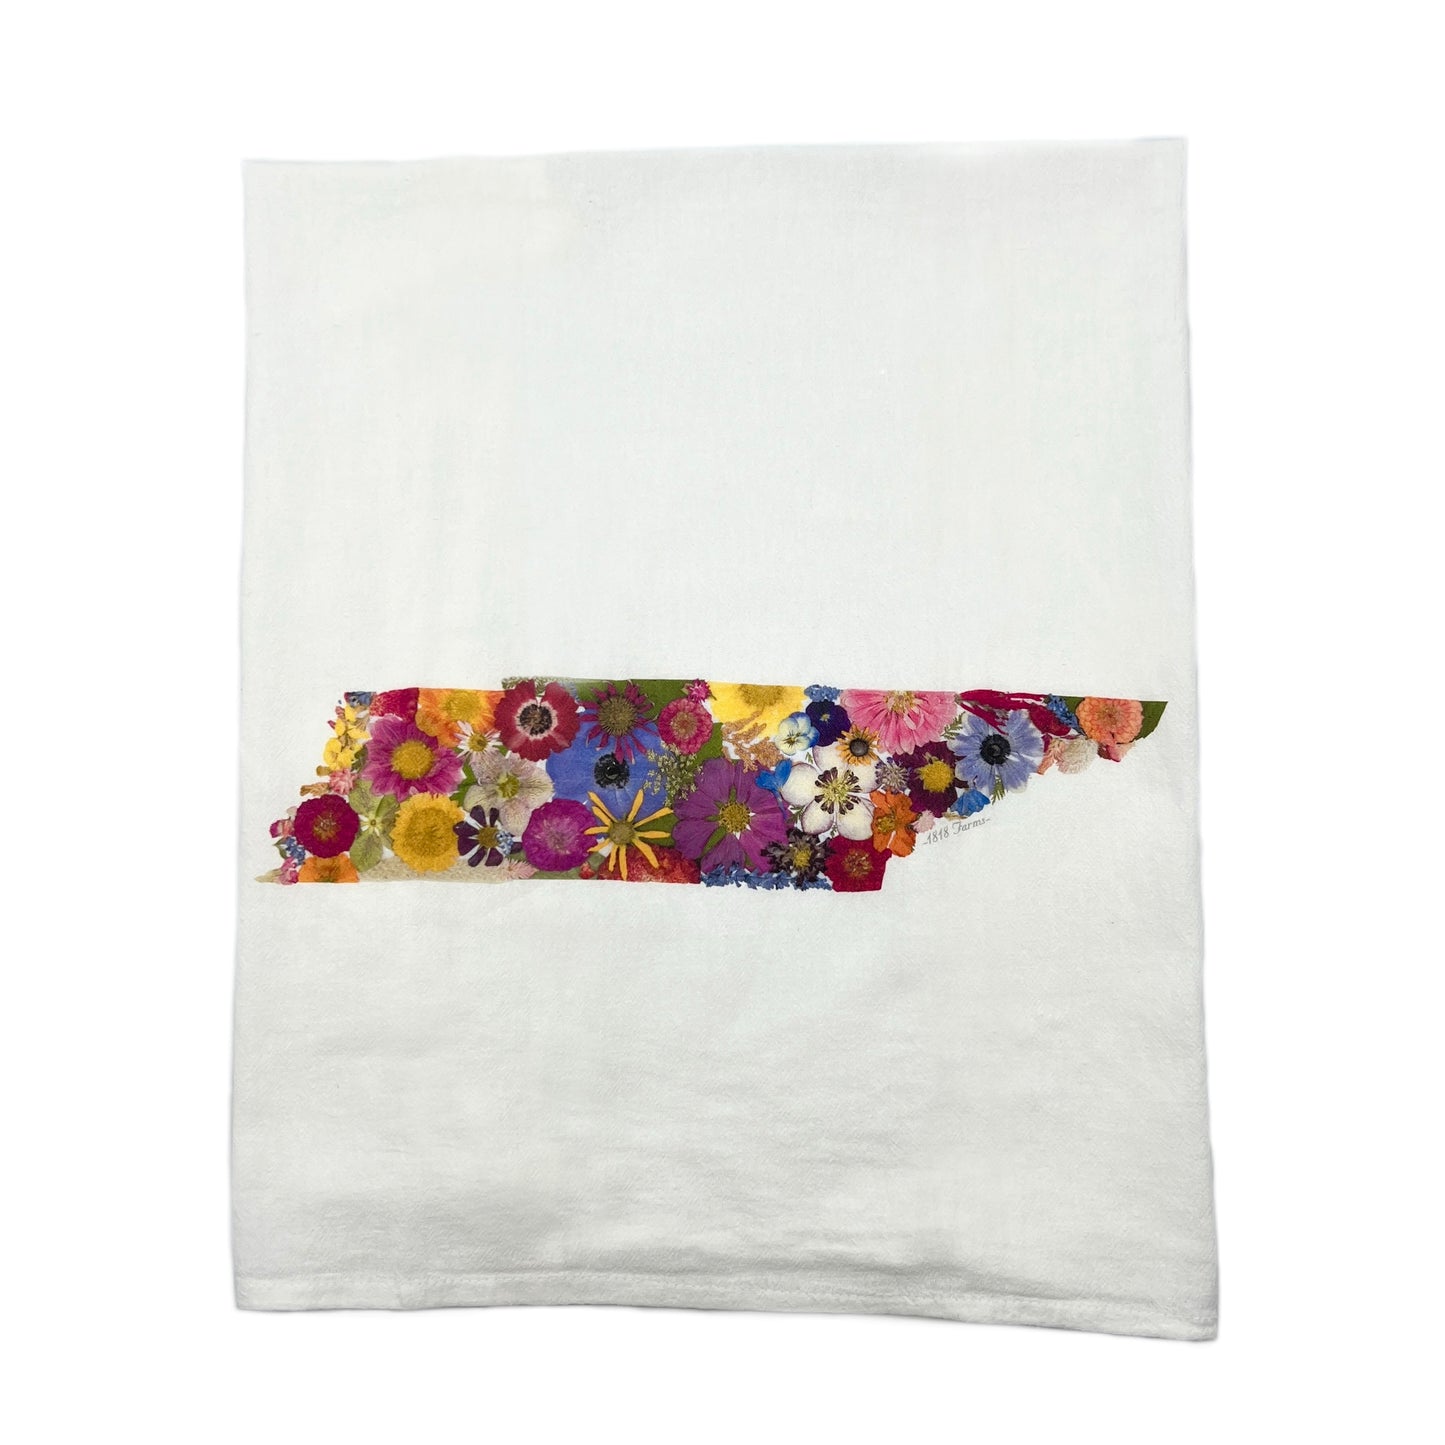 State Themed Flour Sack Towel Featuring Dried, Pressed Flowers - "Where I Bloom" Collection Towel 1818 Farms Tennessee  